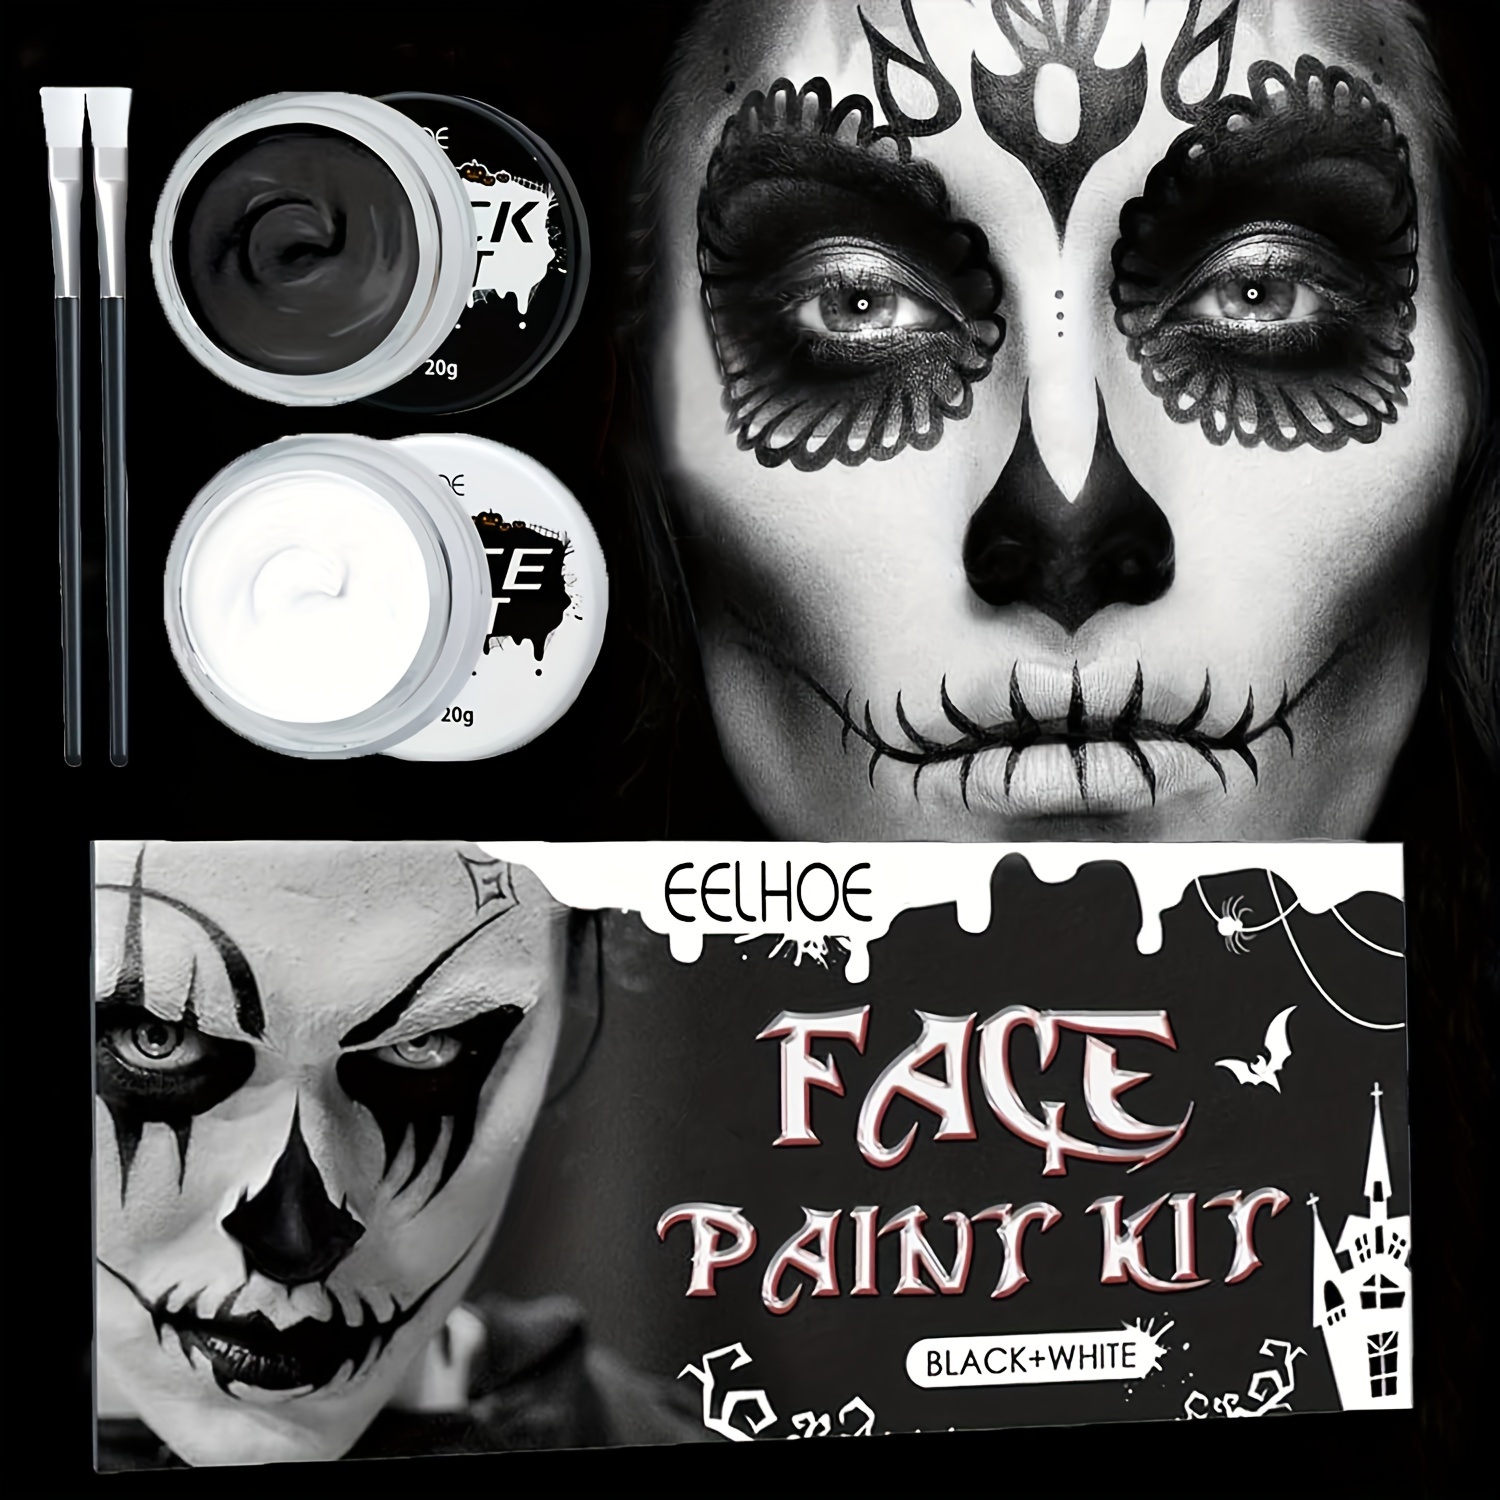 Afflano Black and White Face Body Paint Set of 2 for Party Cosplay